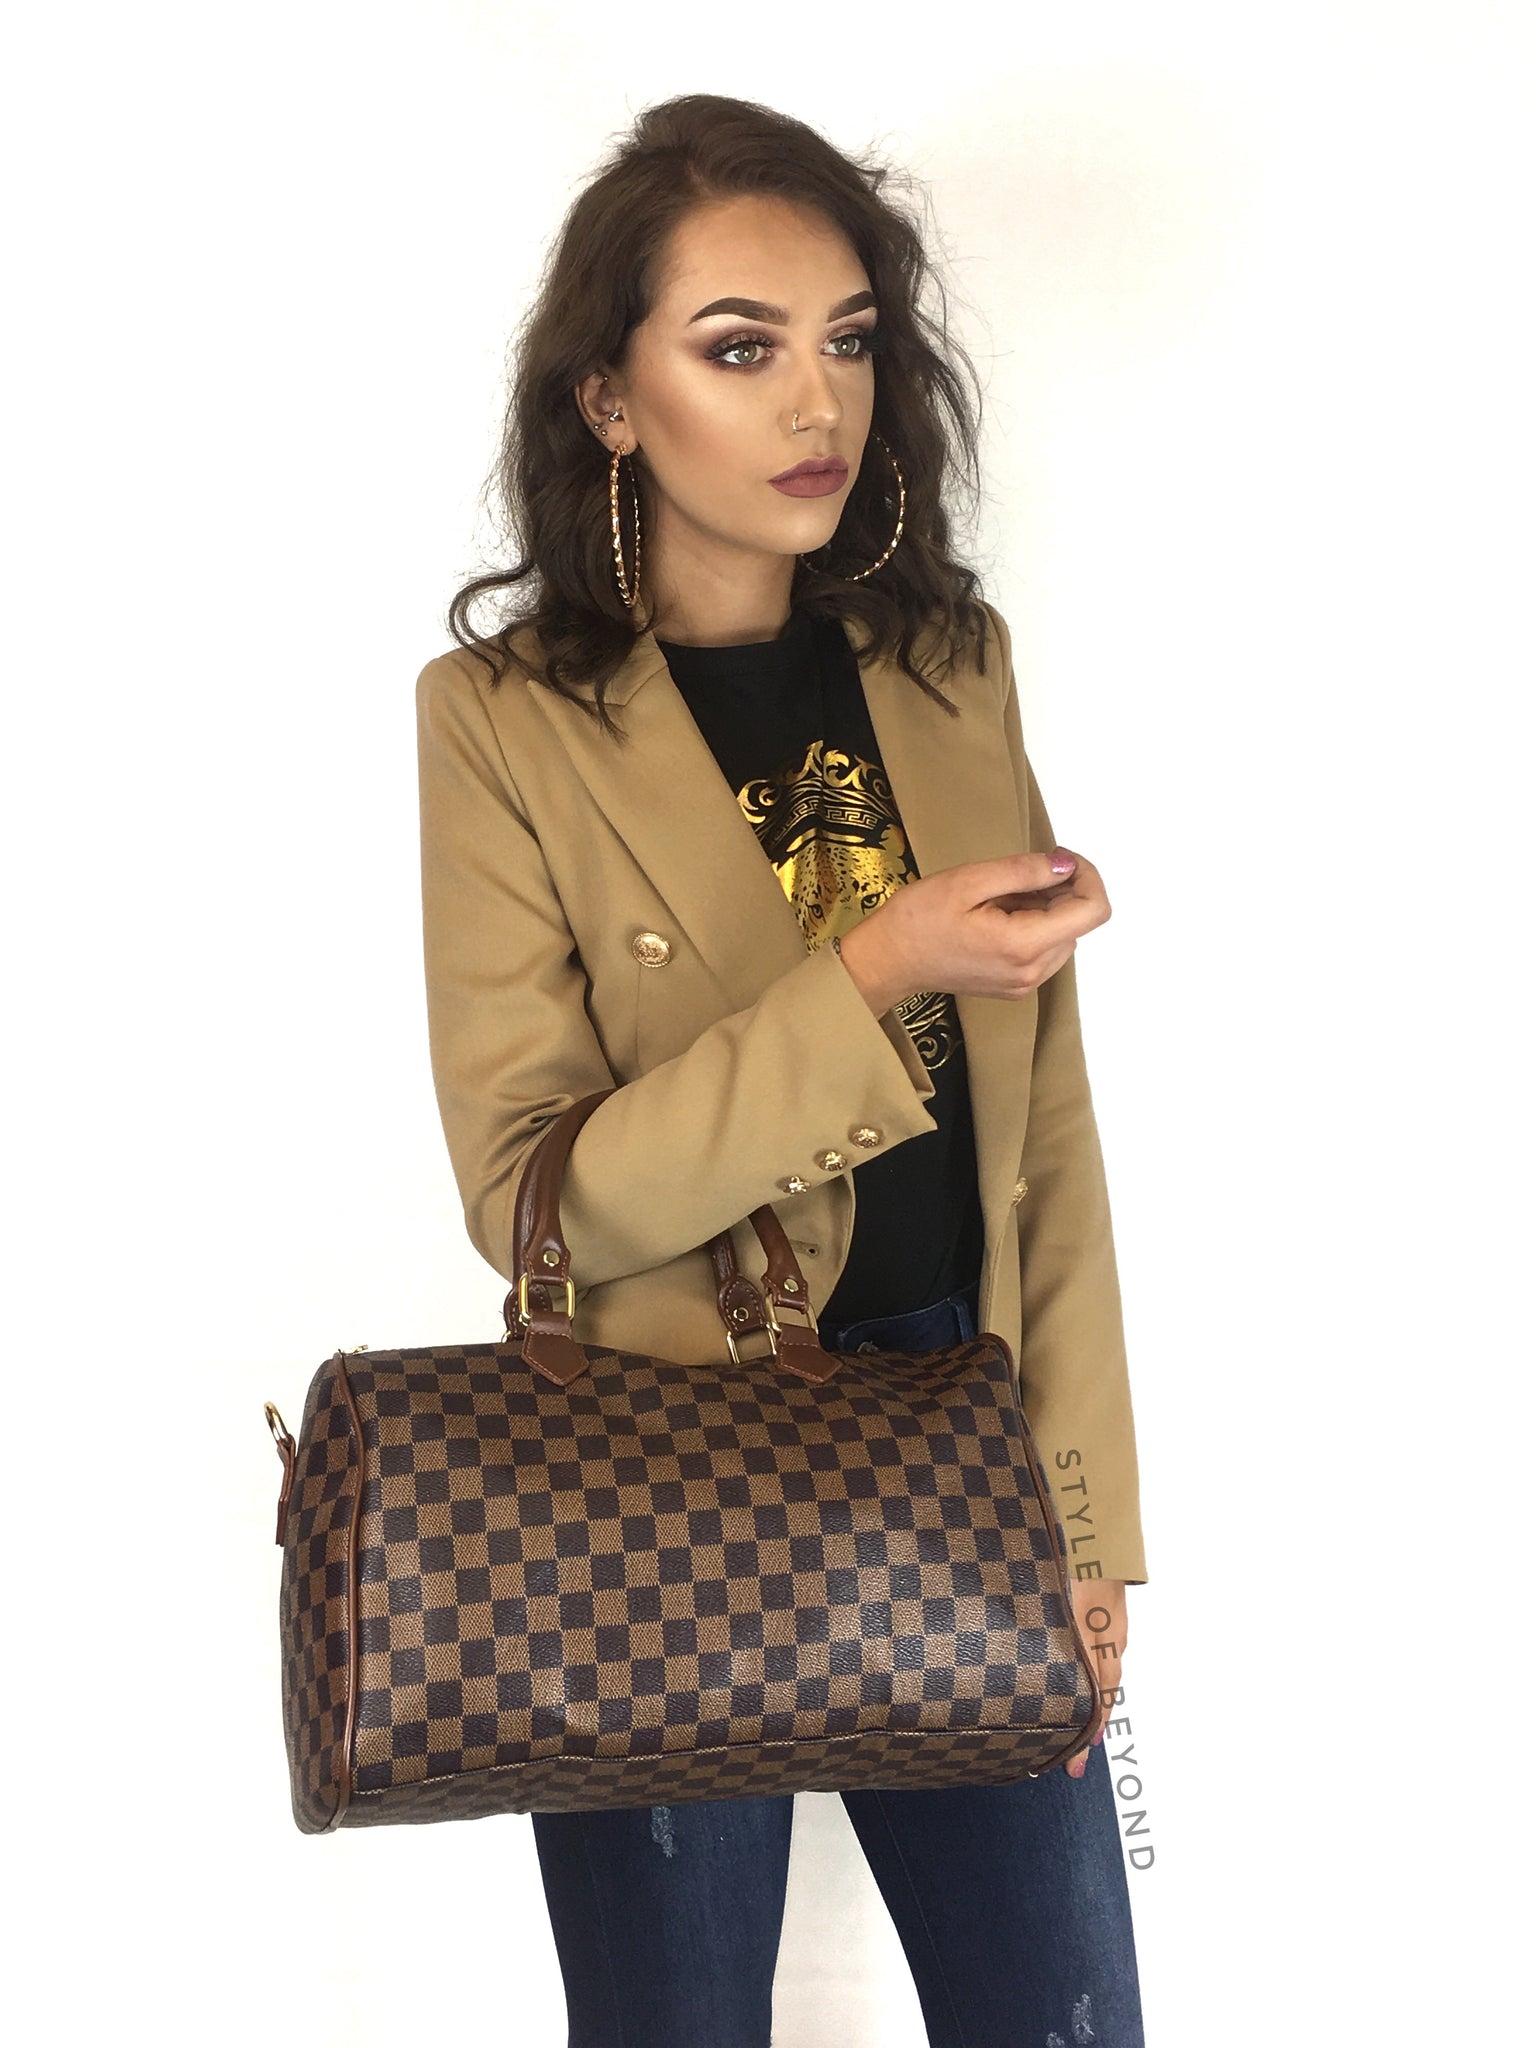 ‘Everyday’ Louis Vuitton Inspired Speedy Bag – Brown Check – Style Of Beyond